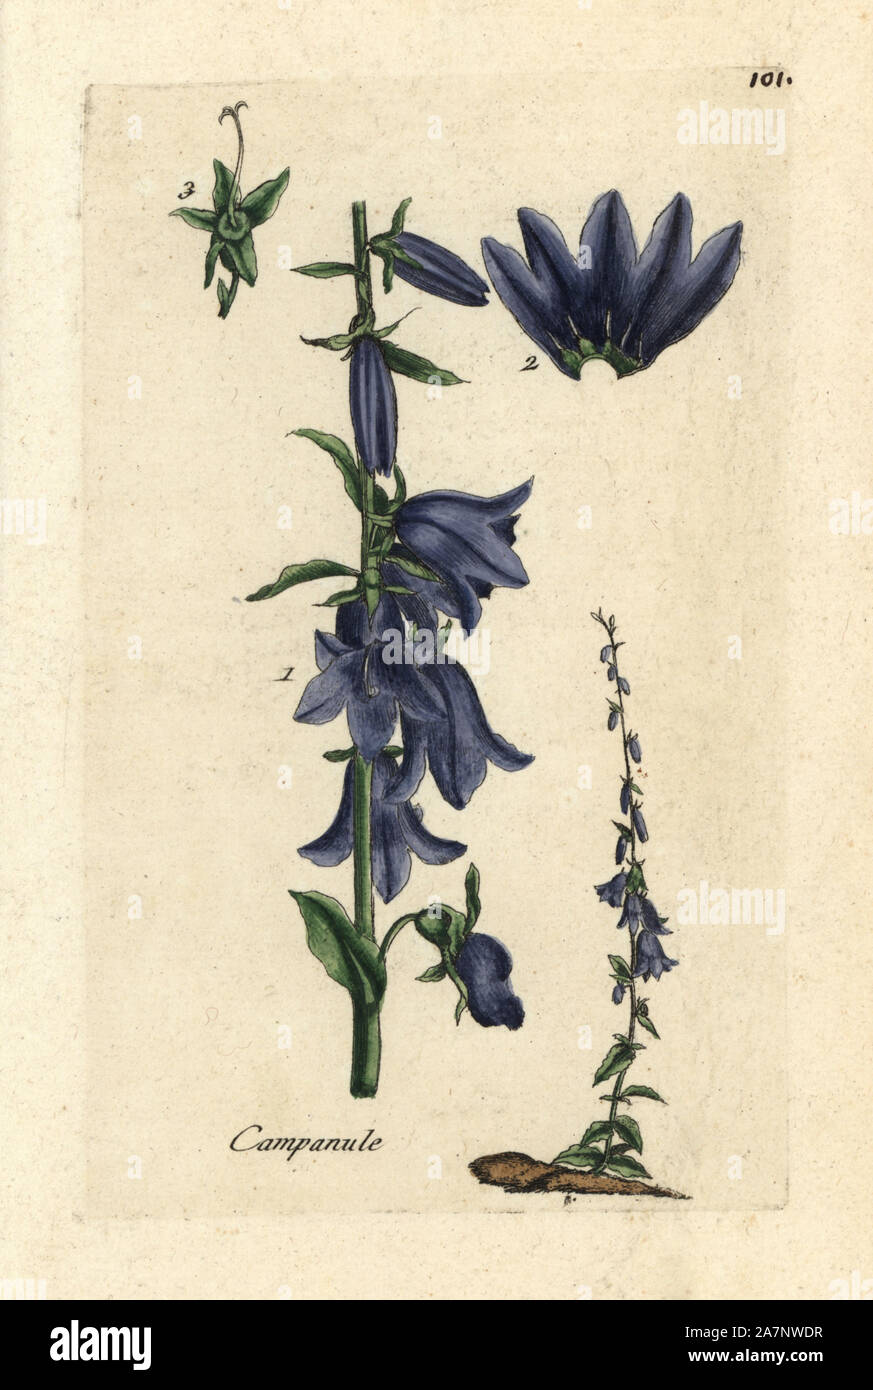 Peach-leaved bellflower, Campanula persicifolia. Handcoloured botanical drawn and engraved by Pierre Bulliard from his own 'Flora Parisiensis,' 1776, Paris, P.F. Didot. Pierre Bulliard (1752-1793) was a famous French botanist who pioneered the three-colour-plate printing technique. His introduction to the flowers of Paris included 640 plants. Stock Photo